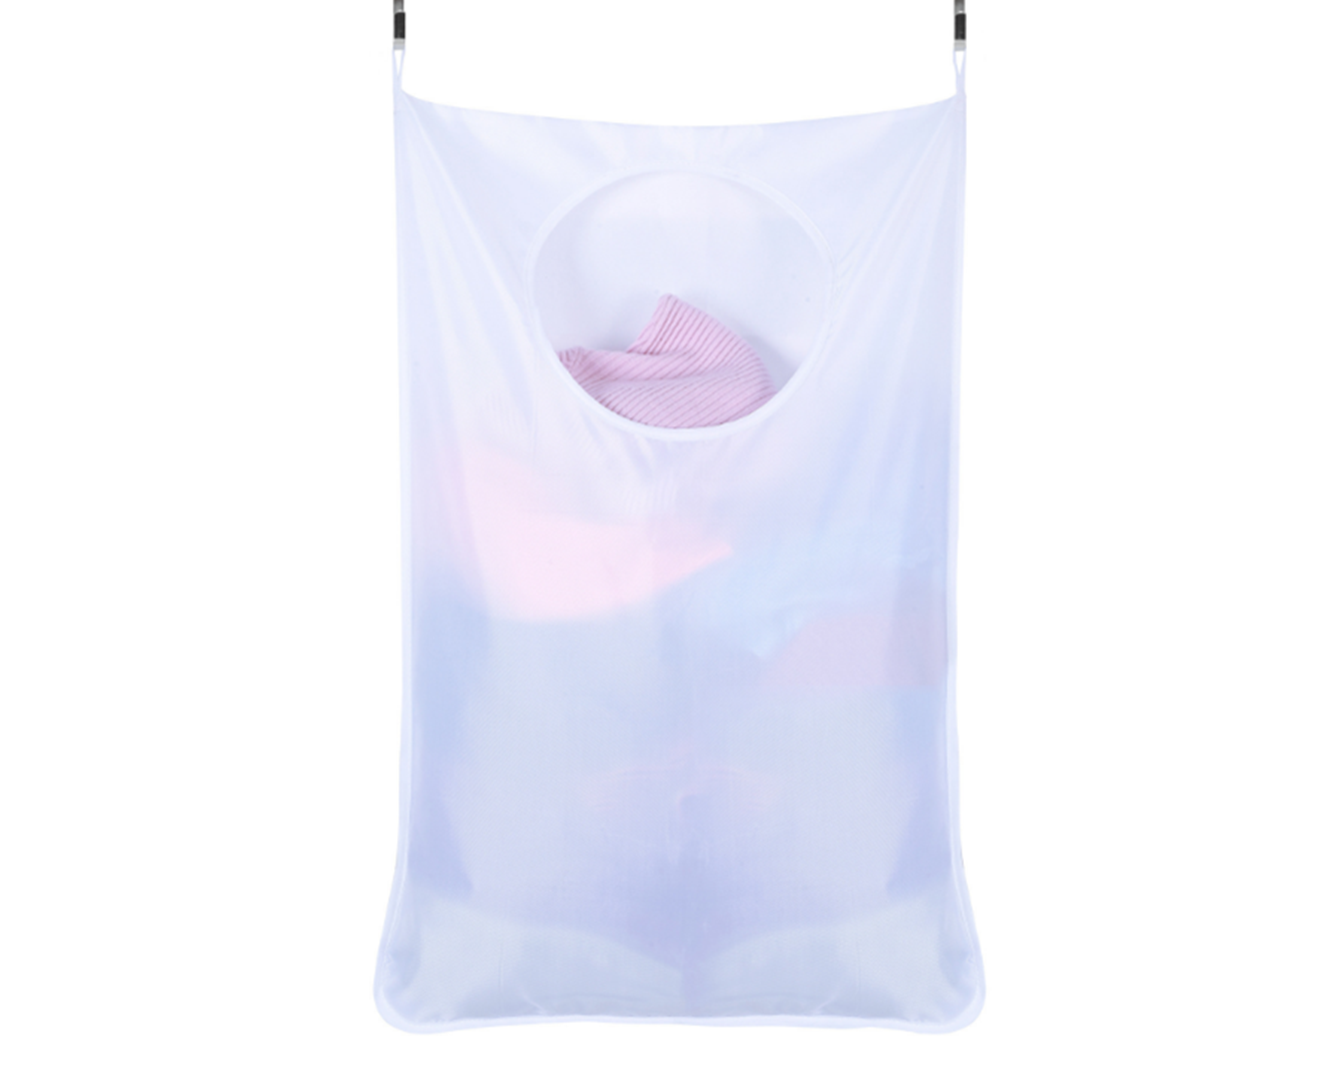 Cloth Bags For Dirty Clothes Behind Doors Oxford Portable Walls For Bags - White